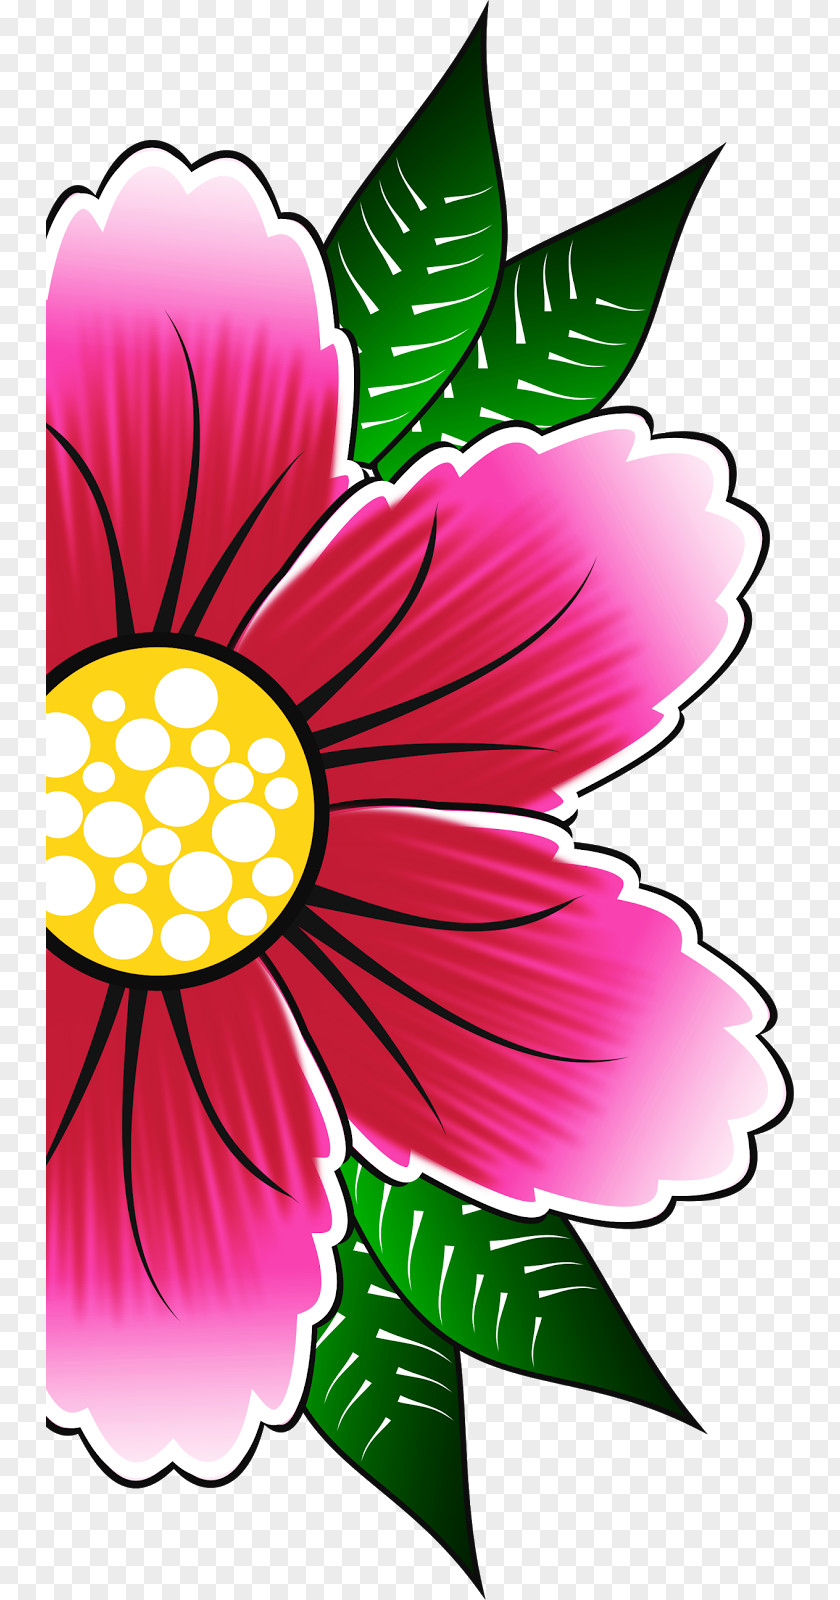 Flor Nail Adhesive Flower Clip Art PNG